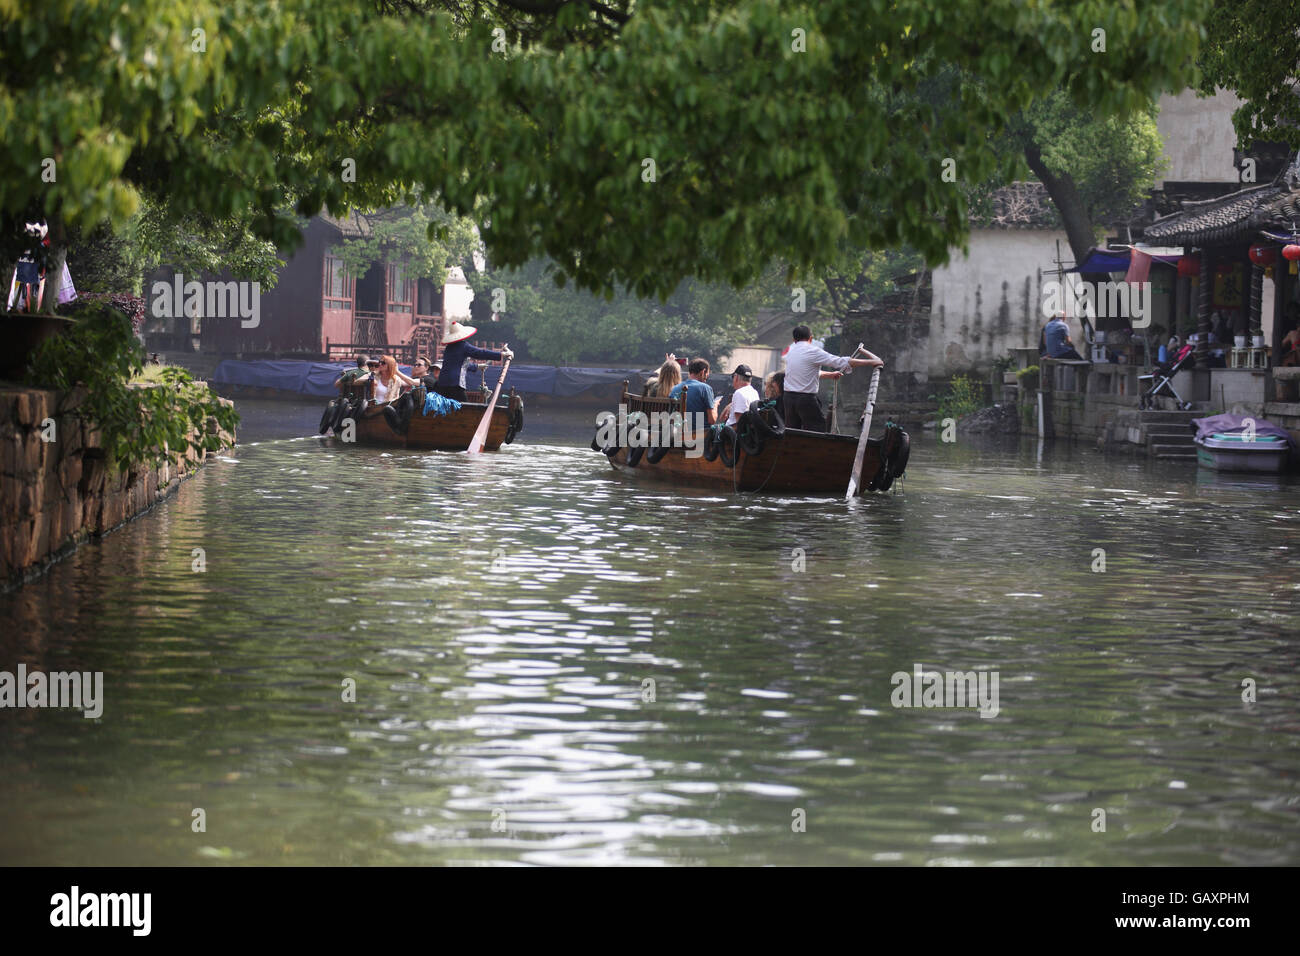 Tourists ride in row boats in a canal in an ancient town in China, a woman is rowing one of  the boat a man is rowing the other Stock Photo